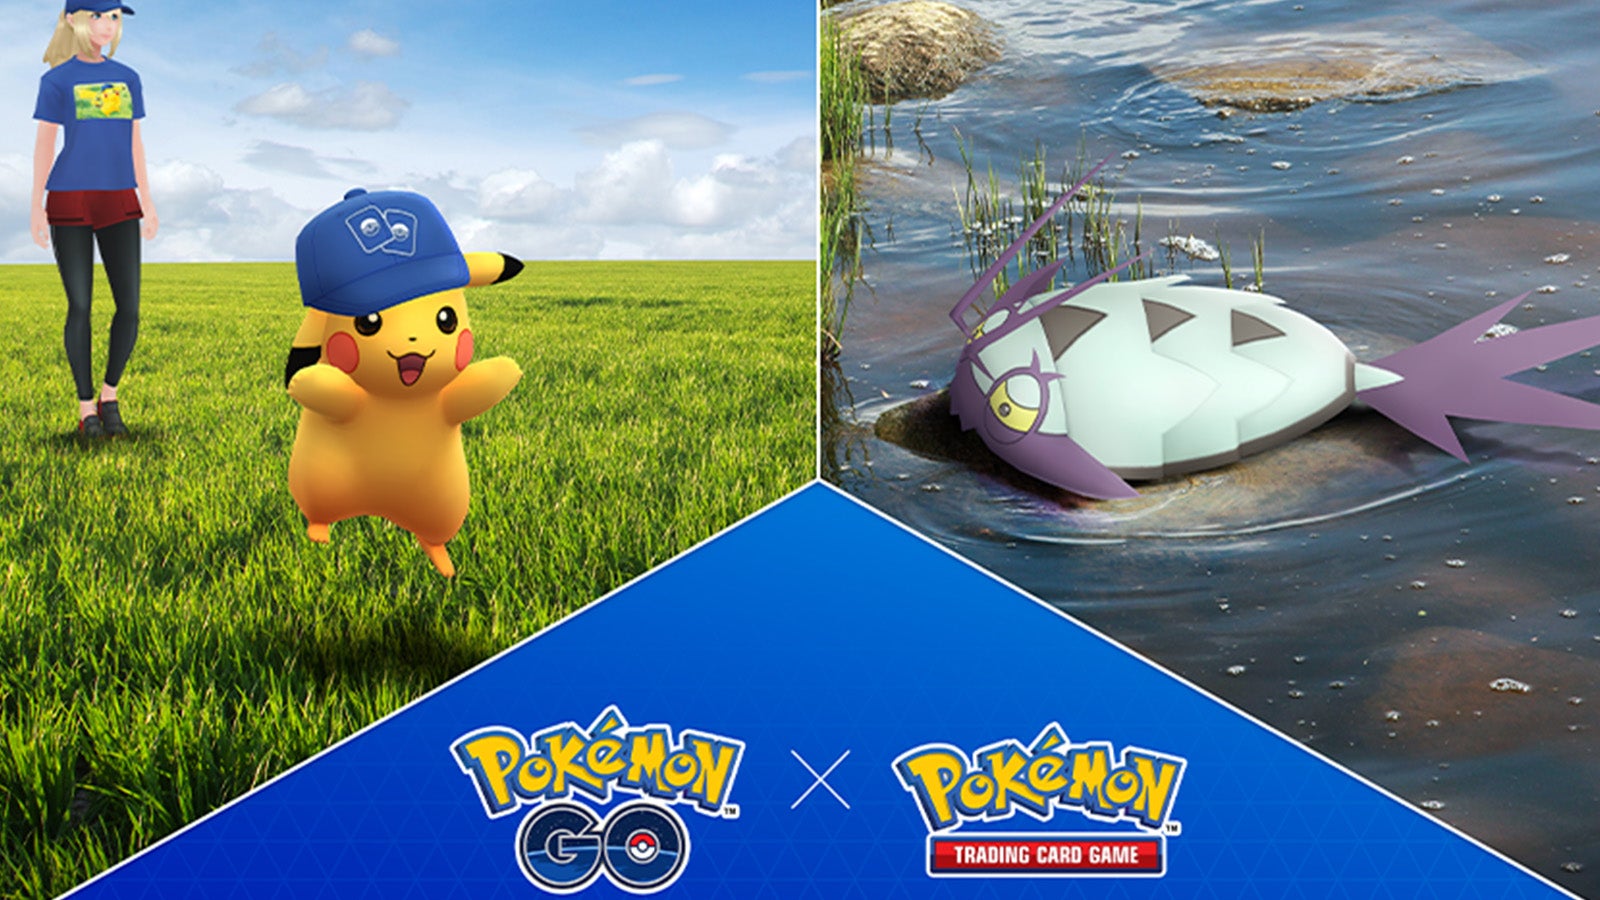 Image for Pokémon Go Pokémon TCG Crossover event Collection Challenges and field research tasks